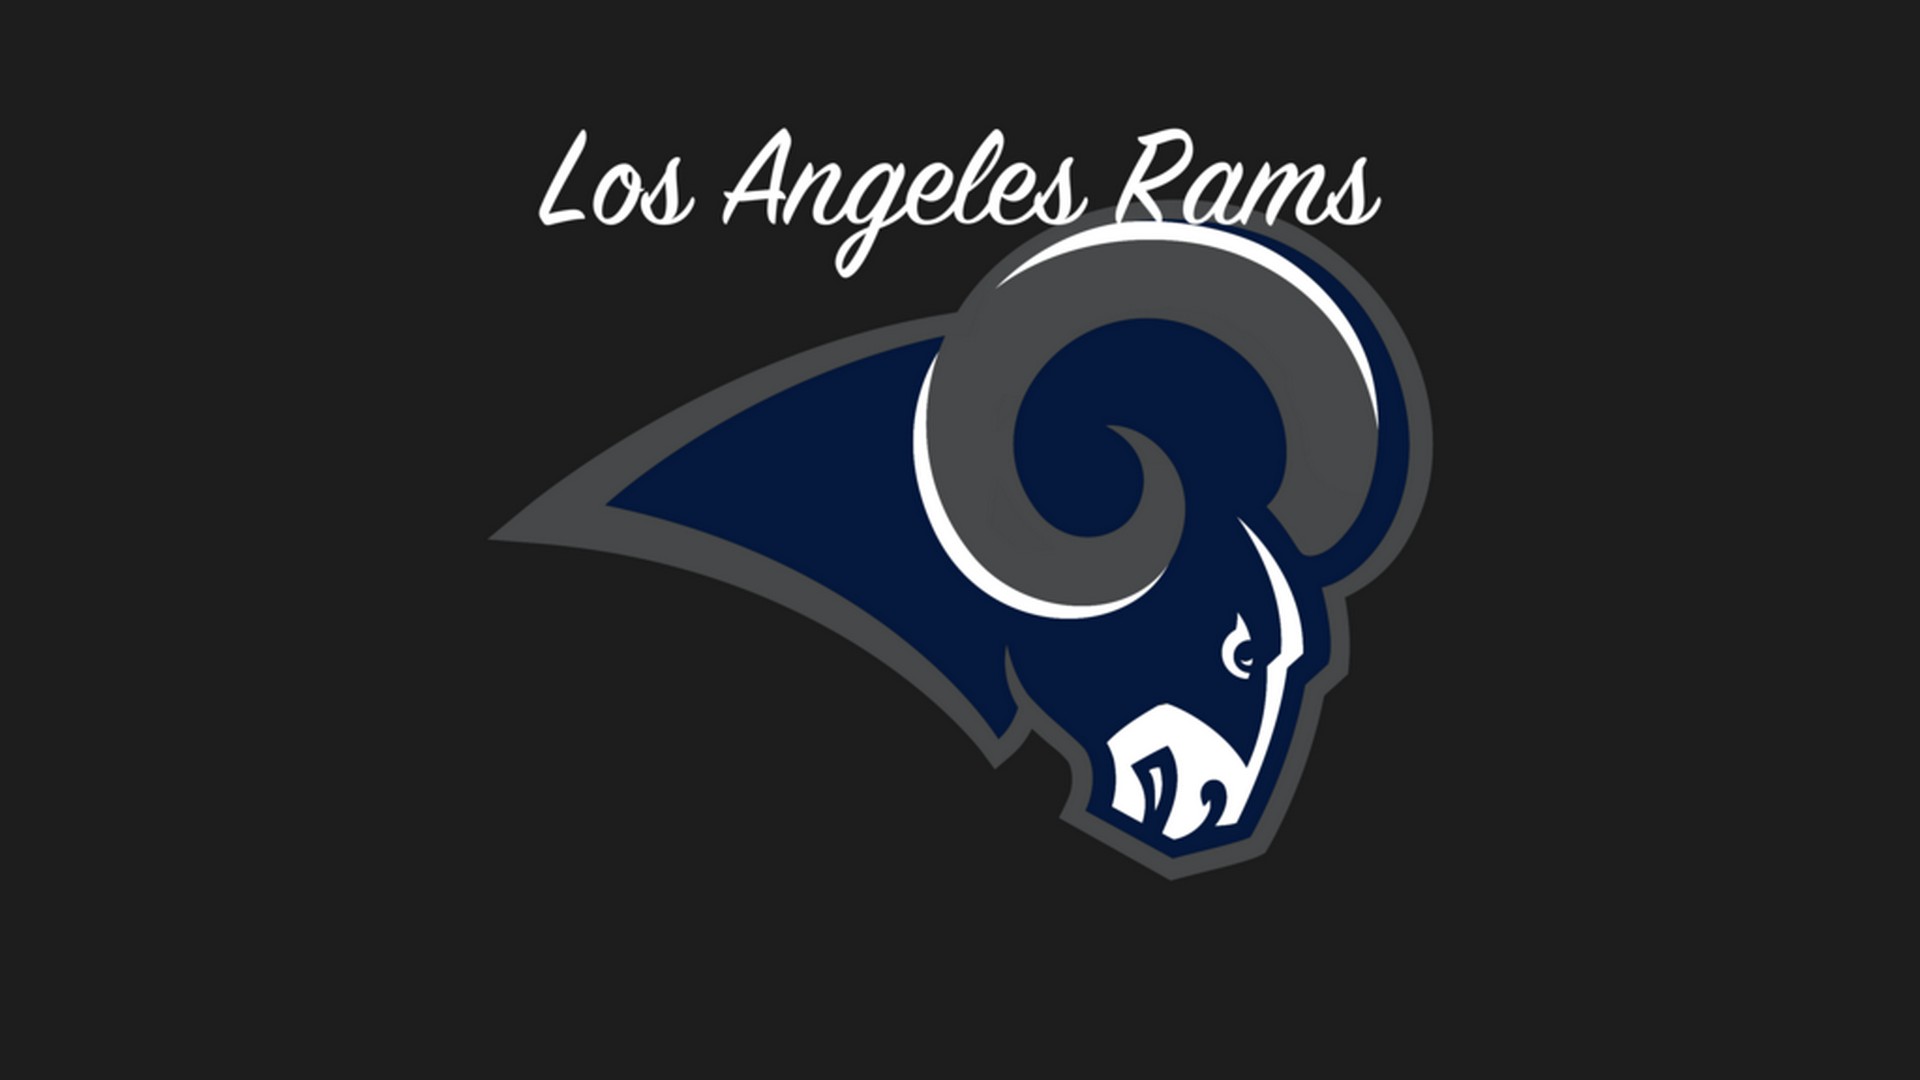 Los Angeles Rams HD Wallpapers with resolution 1920x1080 pixel. You can make this wallpaper for your Mac or Windows Desktop Background, iPhone, Android or Tablet and another Smartphone device